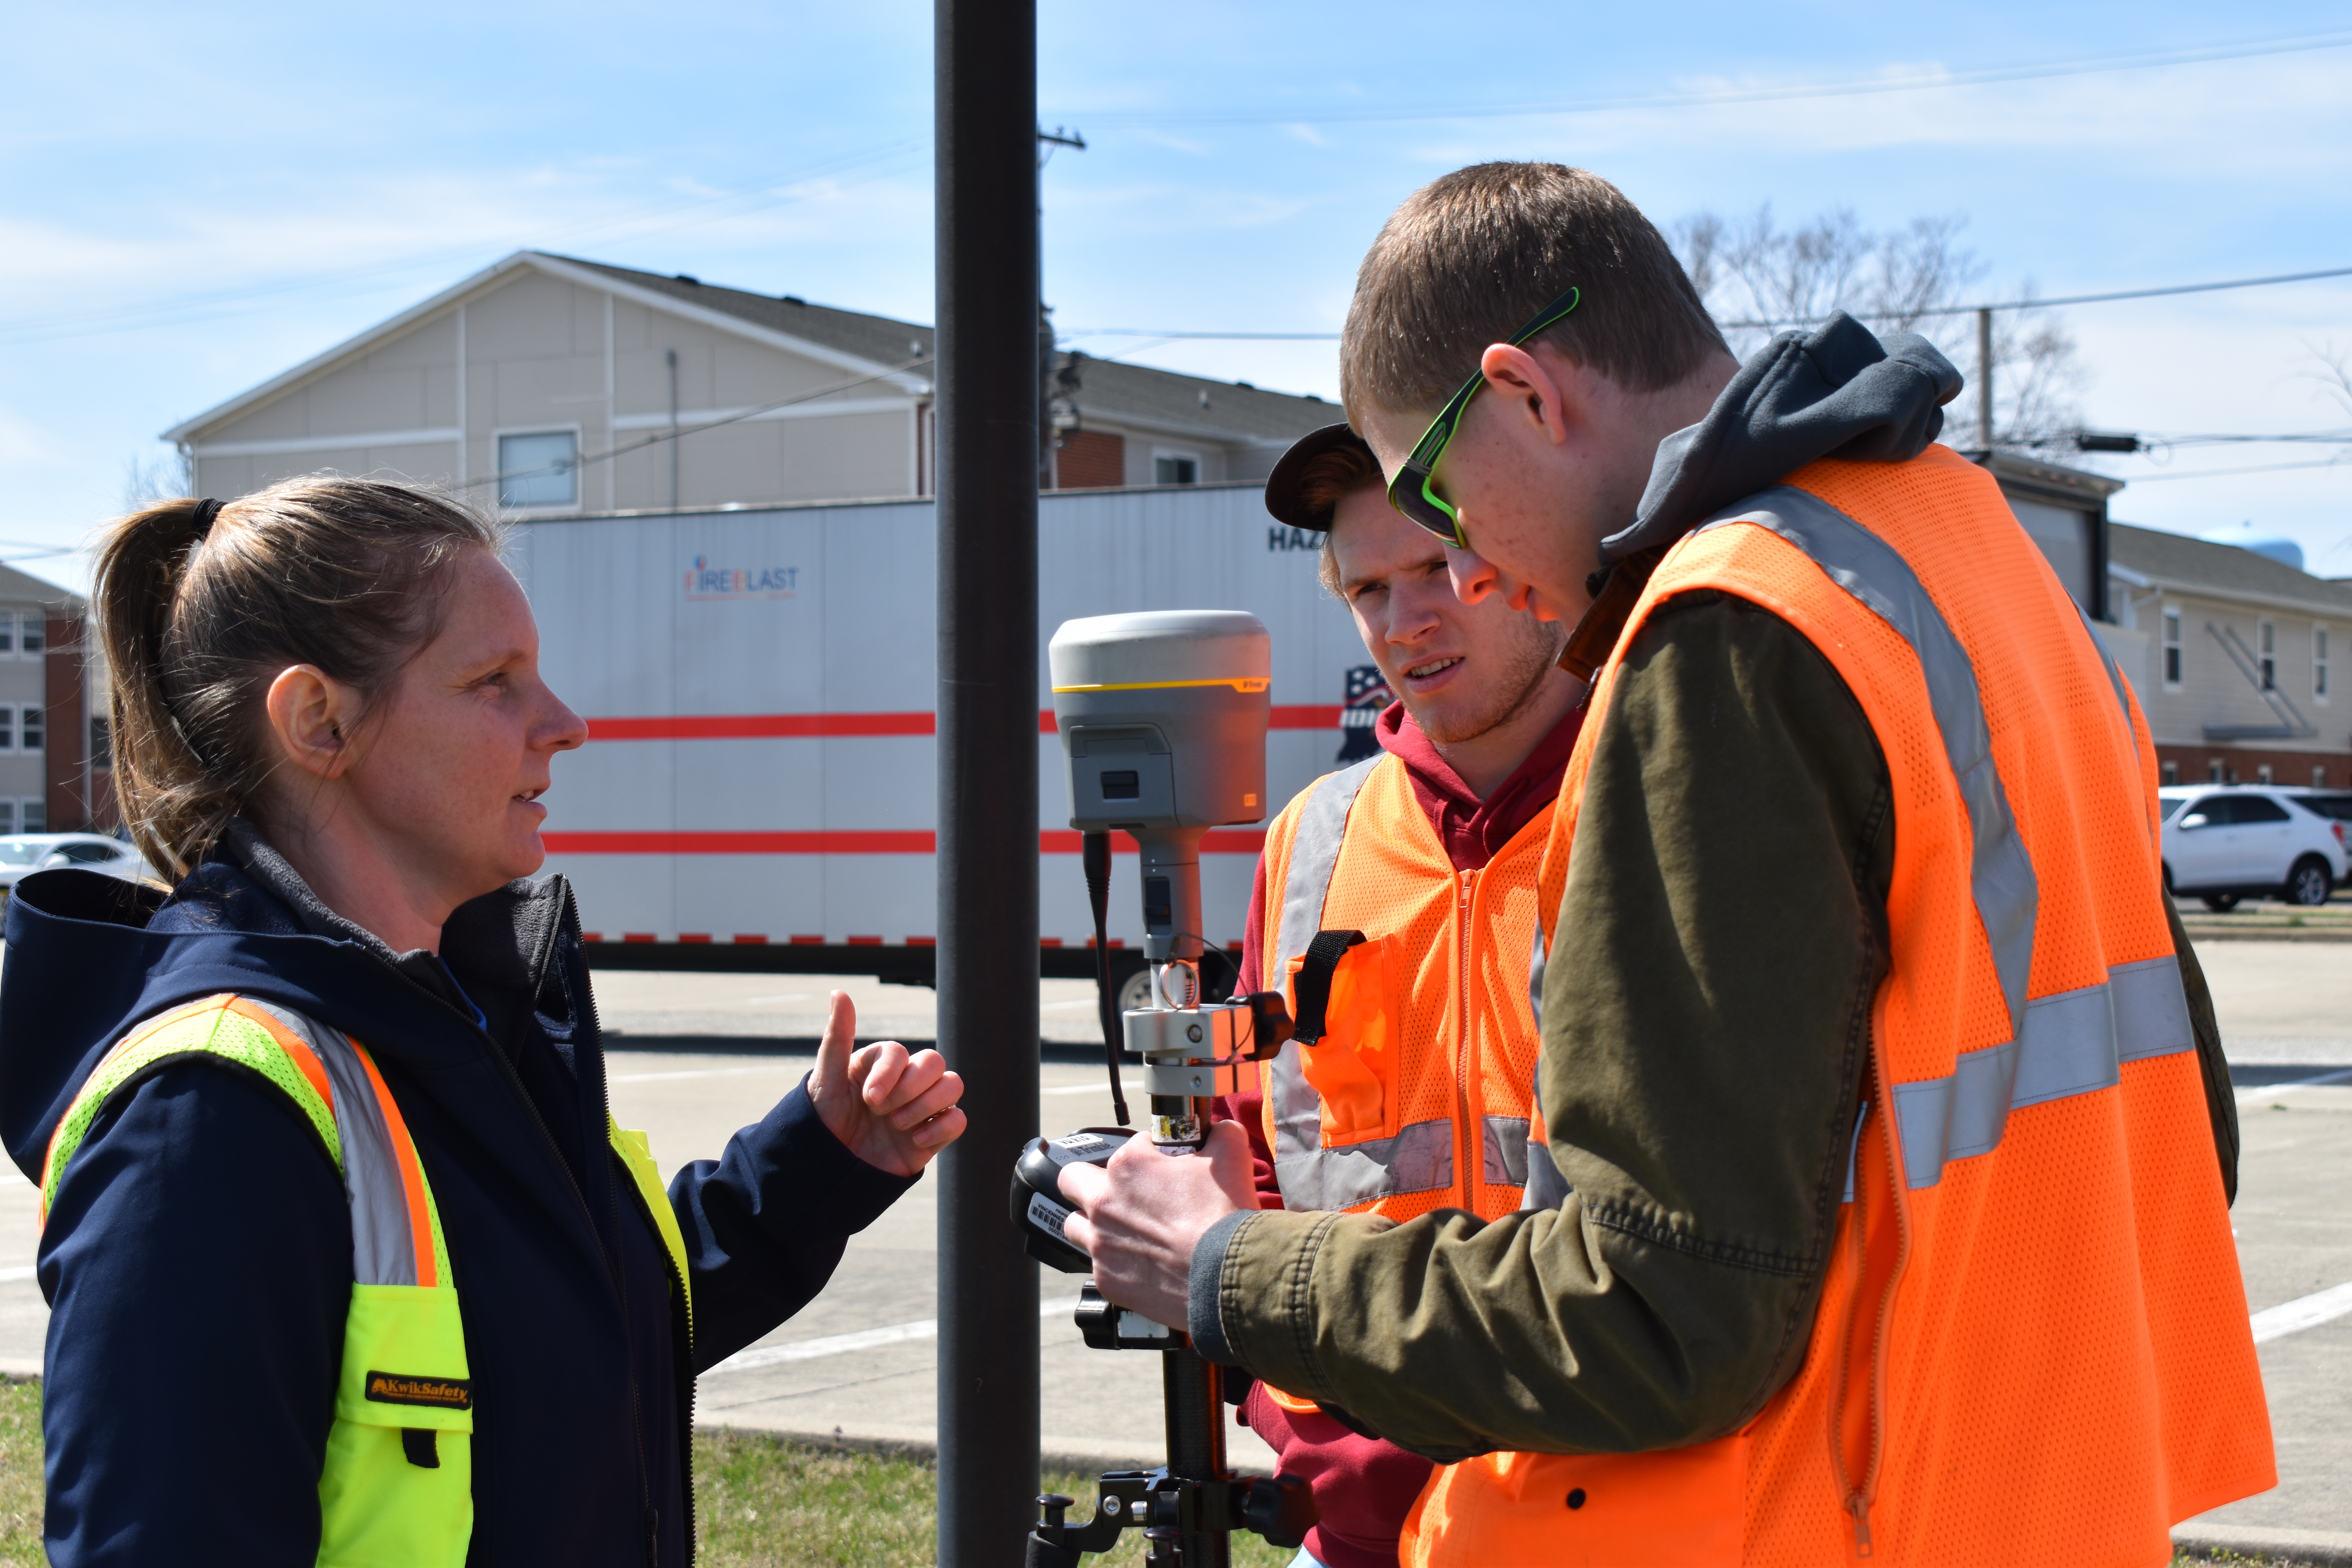 Jessica Hess observes her Surveying Technology students in the field